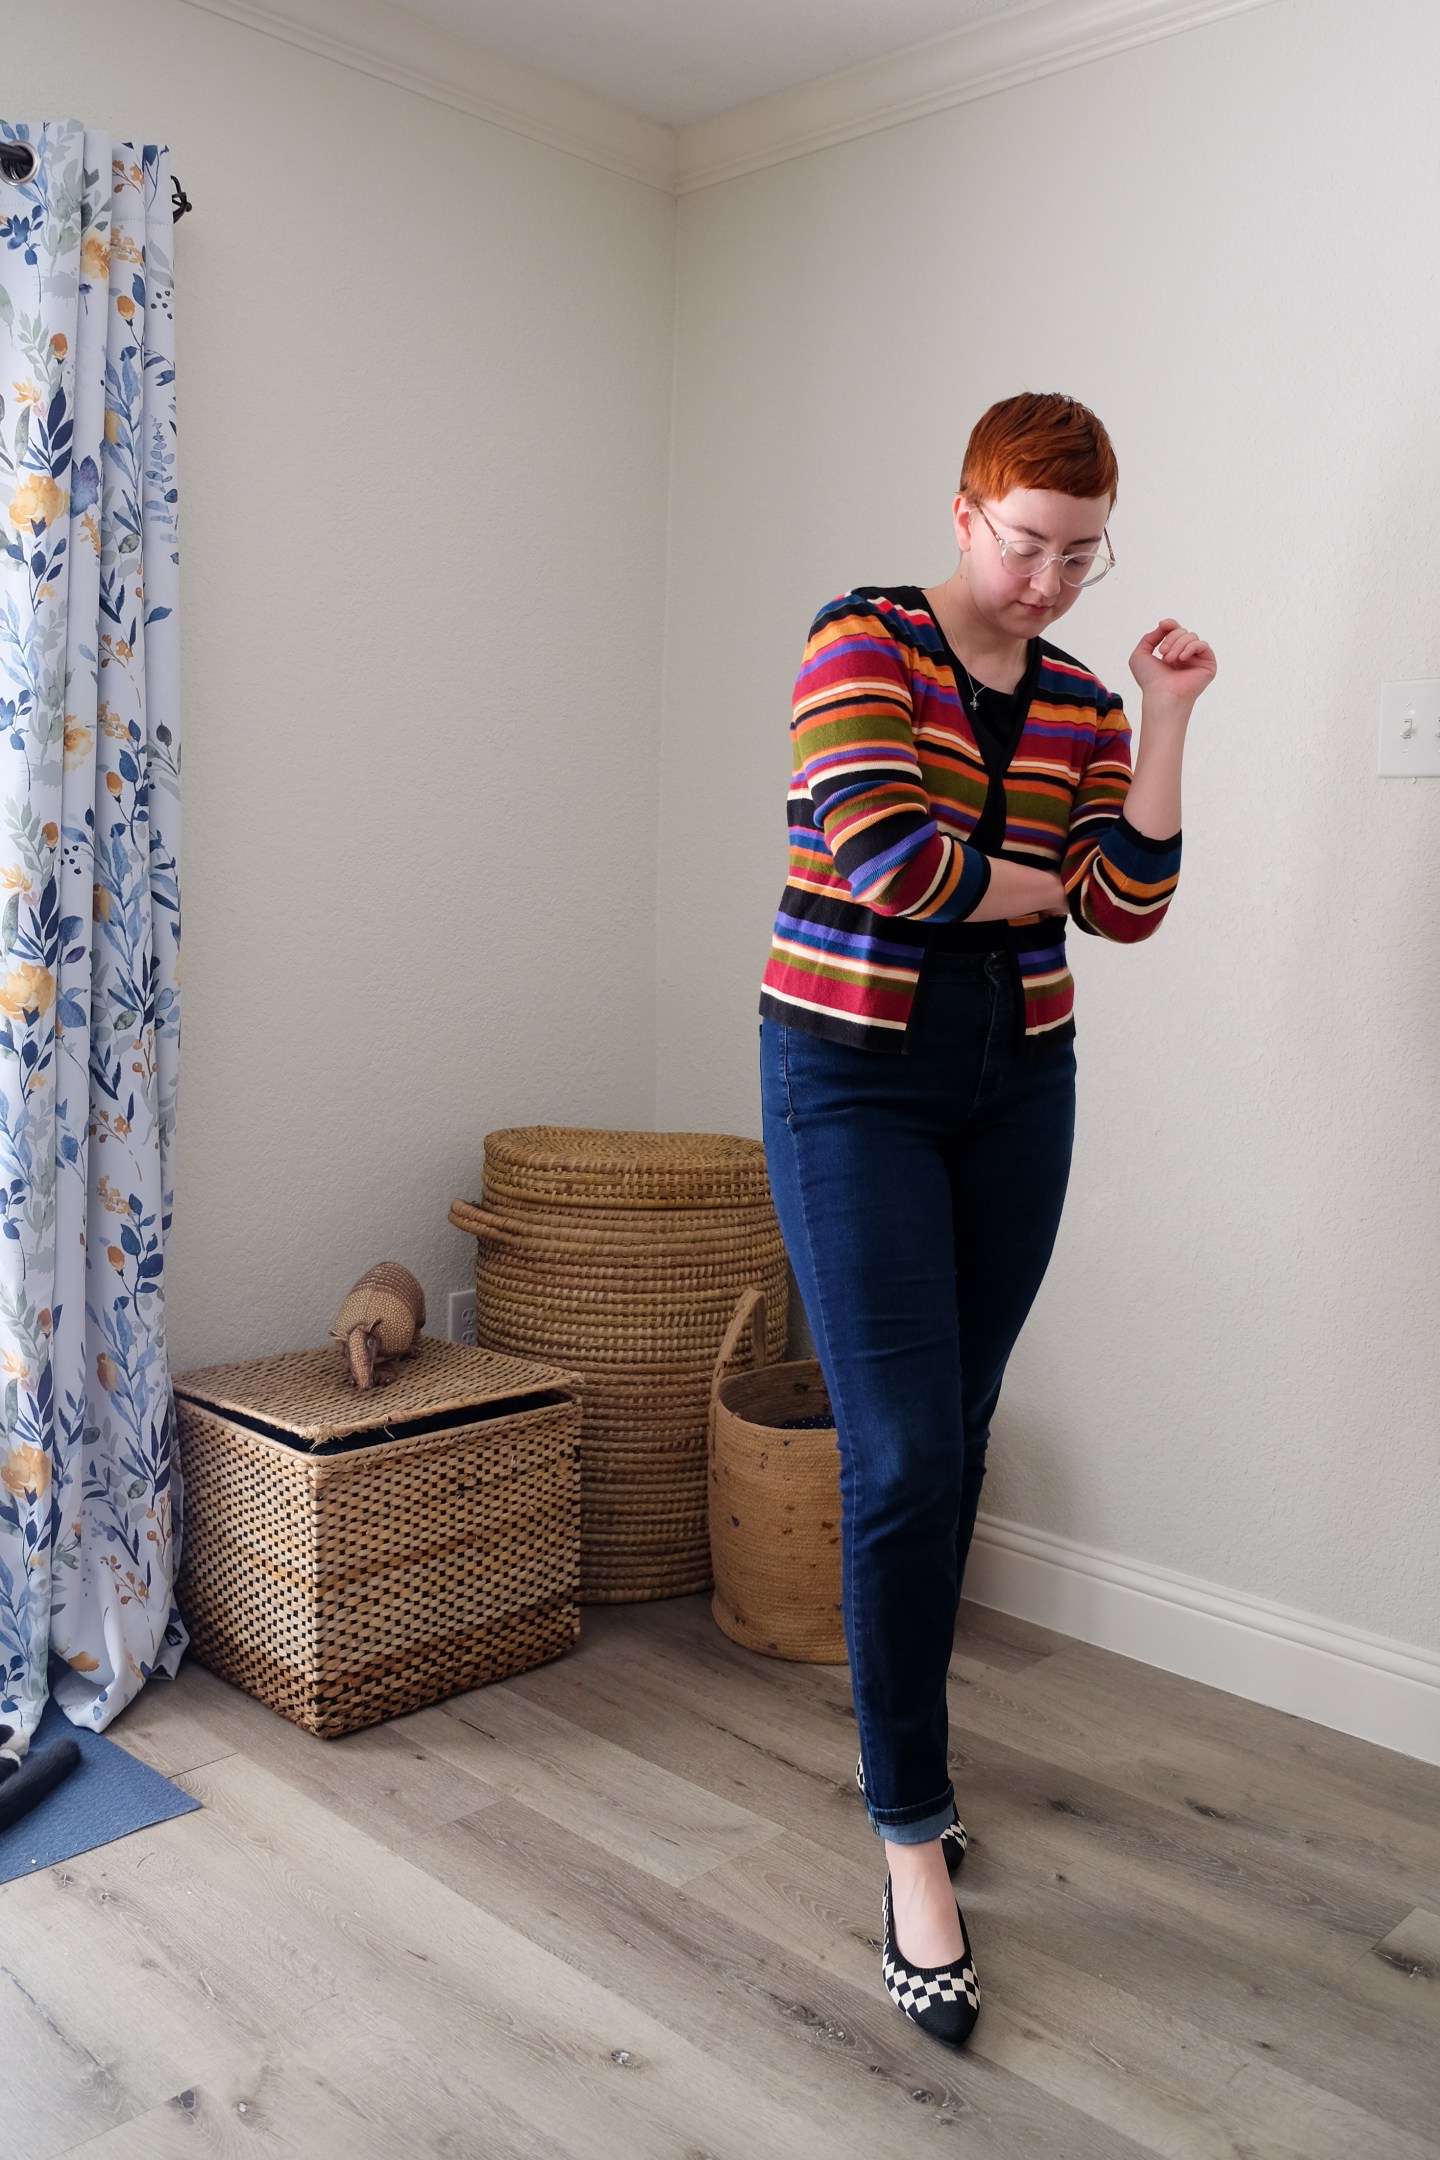 Leah stands in her bedroom wearing a colorful striped cardigan, jeans, and checkered flats - Vivaia Knit Flats Review